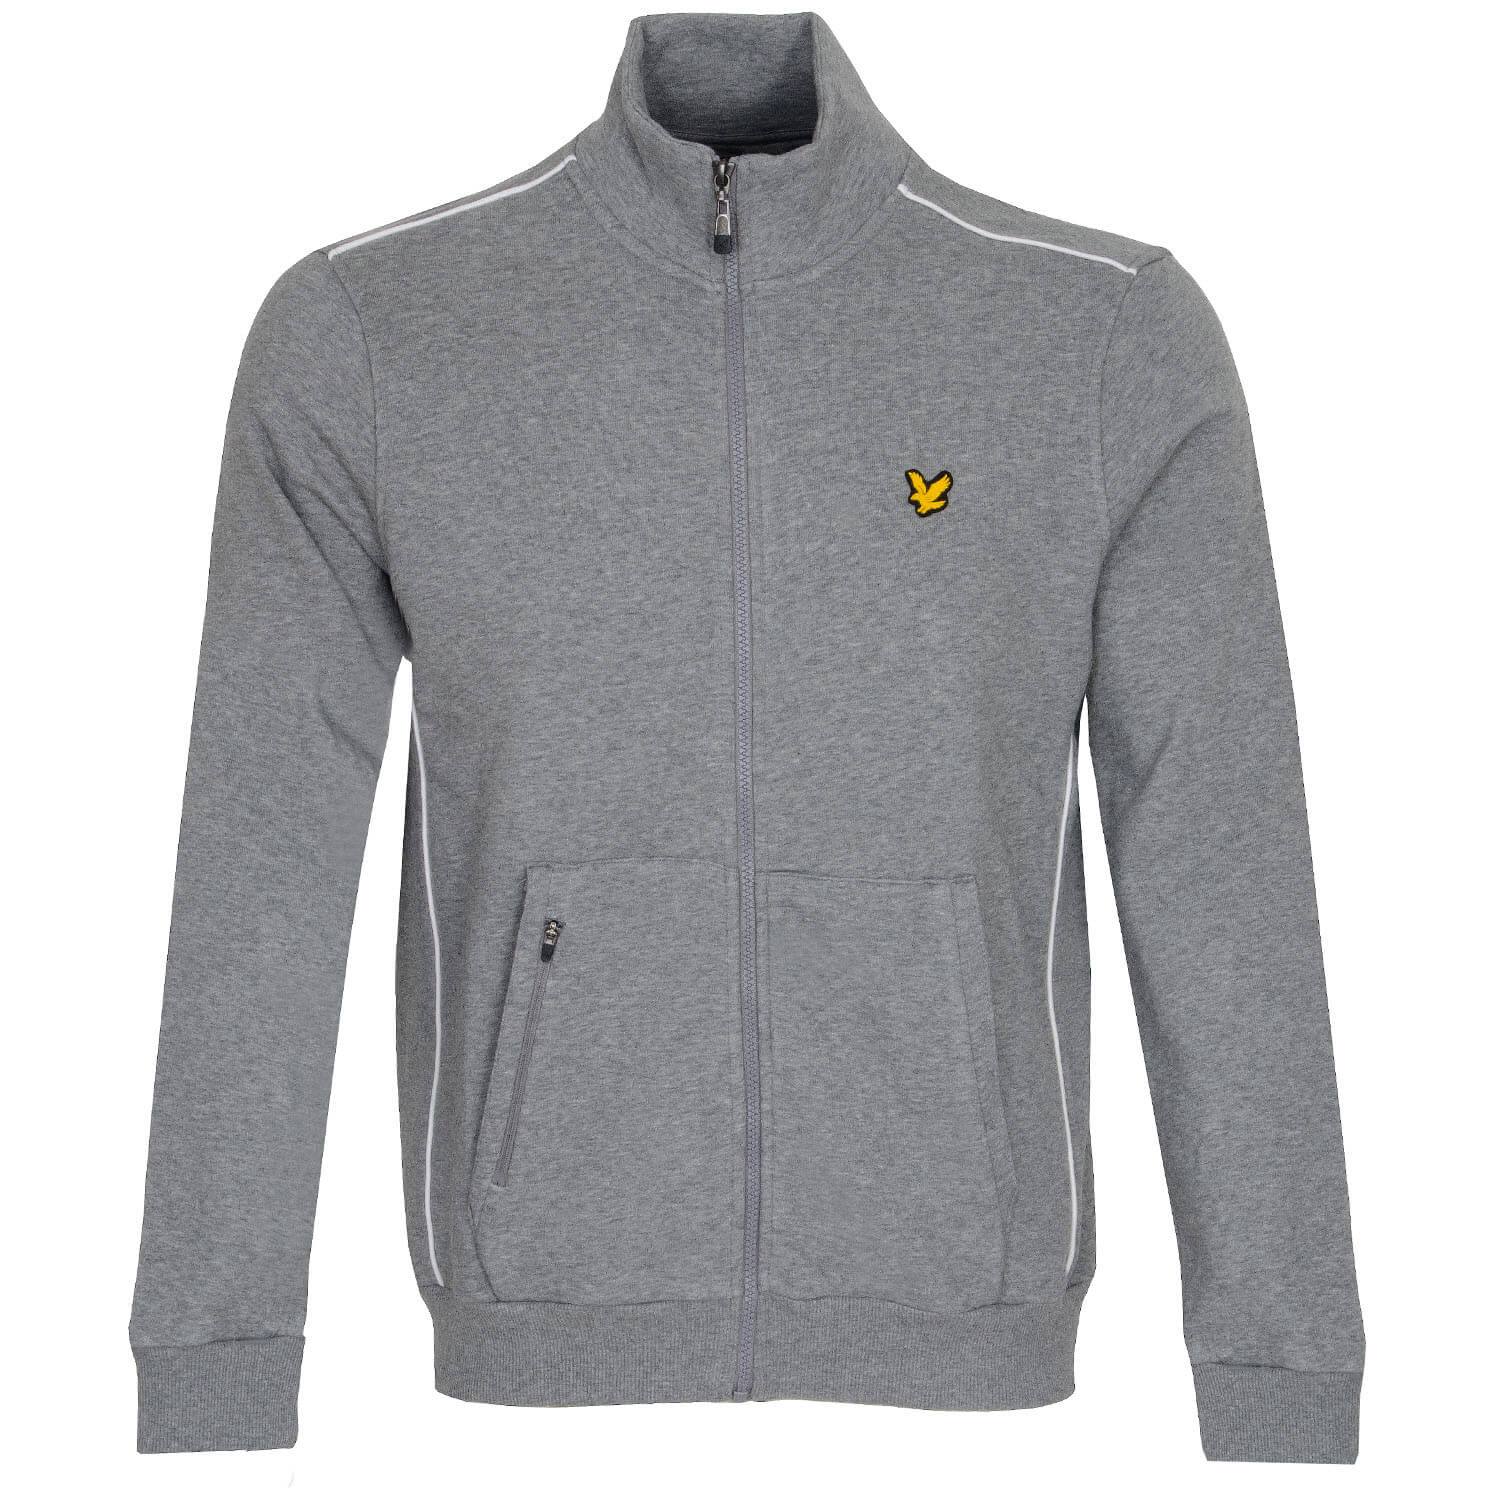 Lyle & Scott Contrast Piping Track Jacket